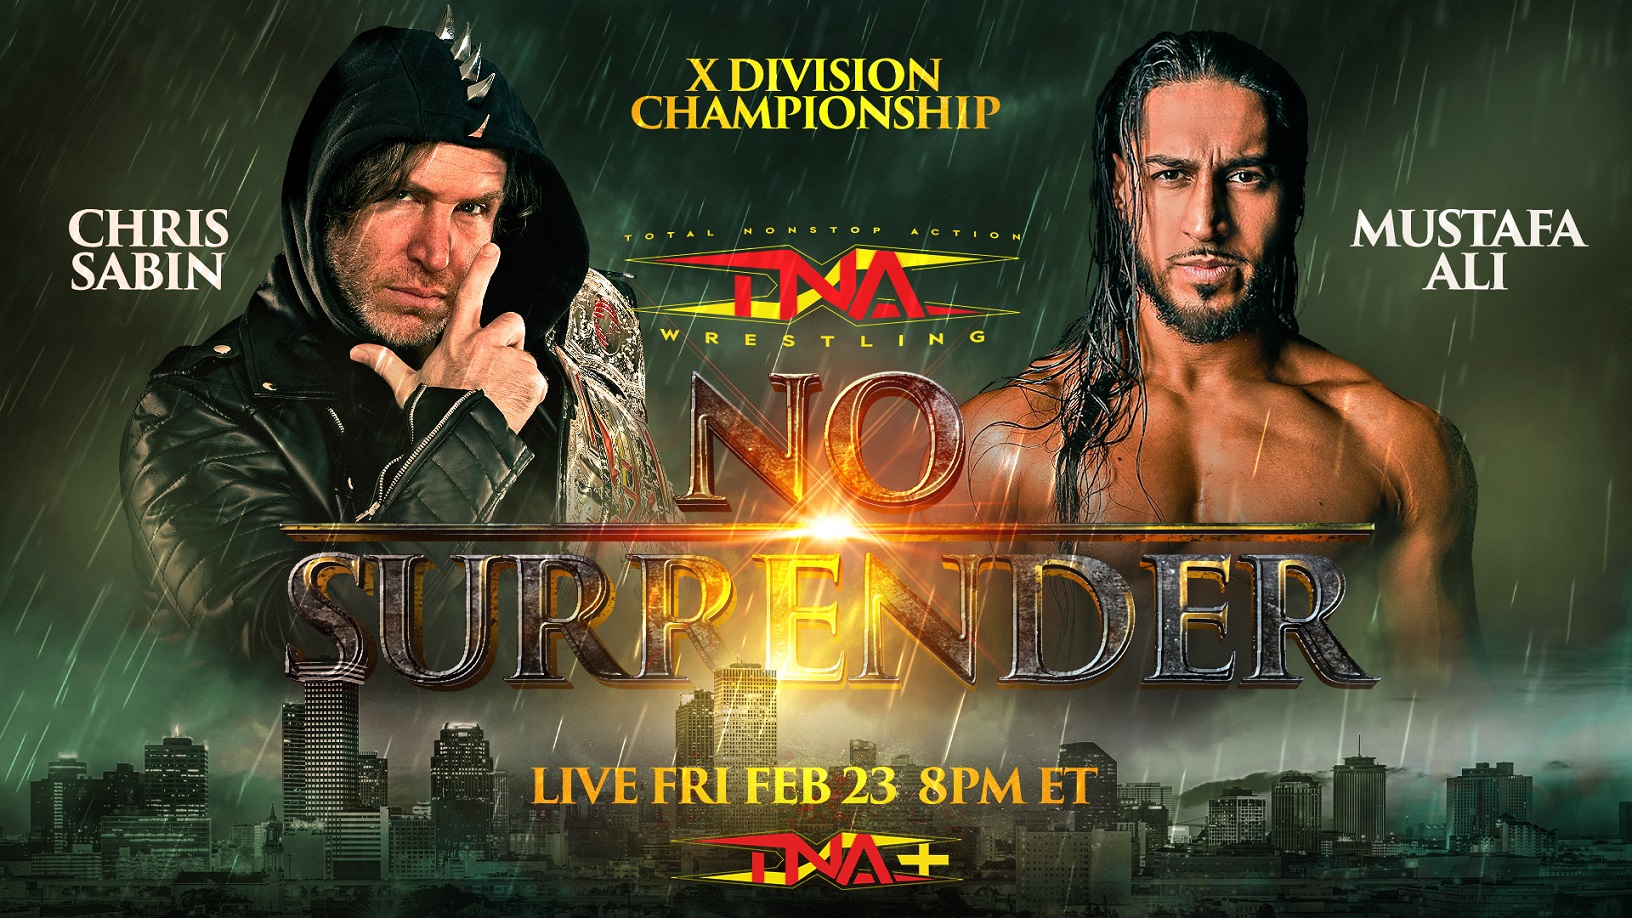 Mustafa Ali Looks to Become X-Division Champion in His TNA Wrestling Debut at No Surrender – TNA Wrestling